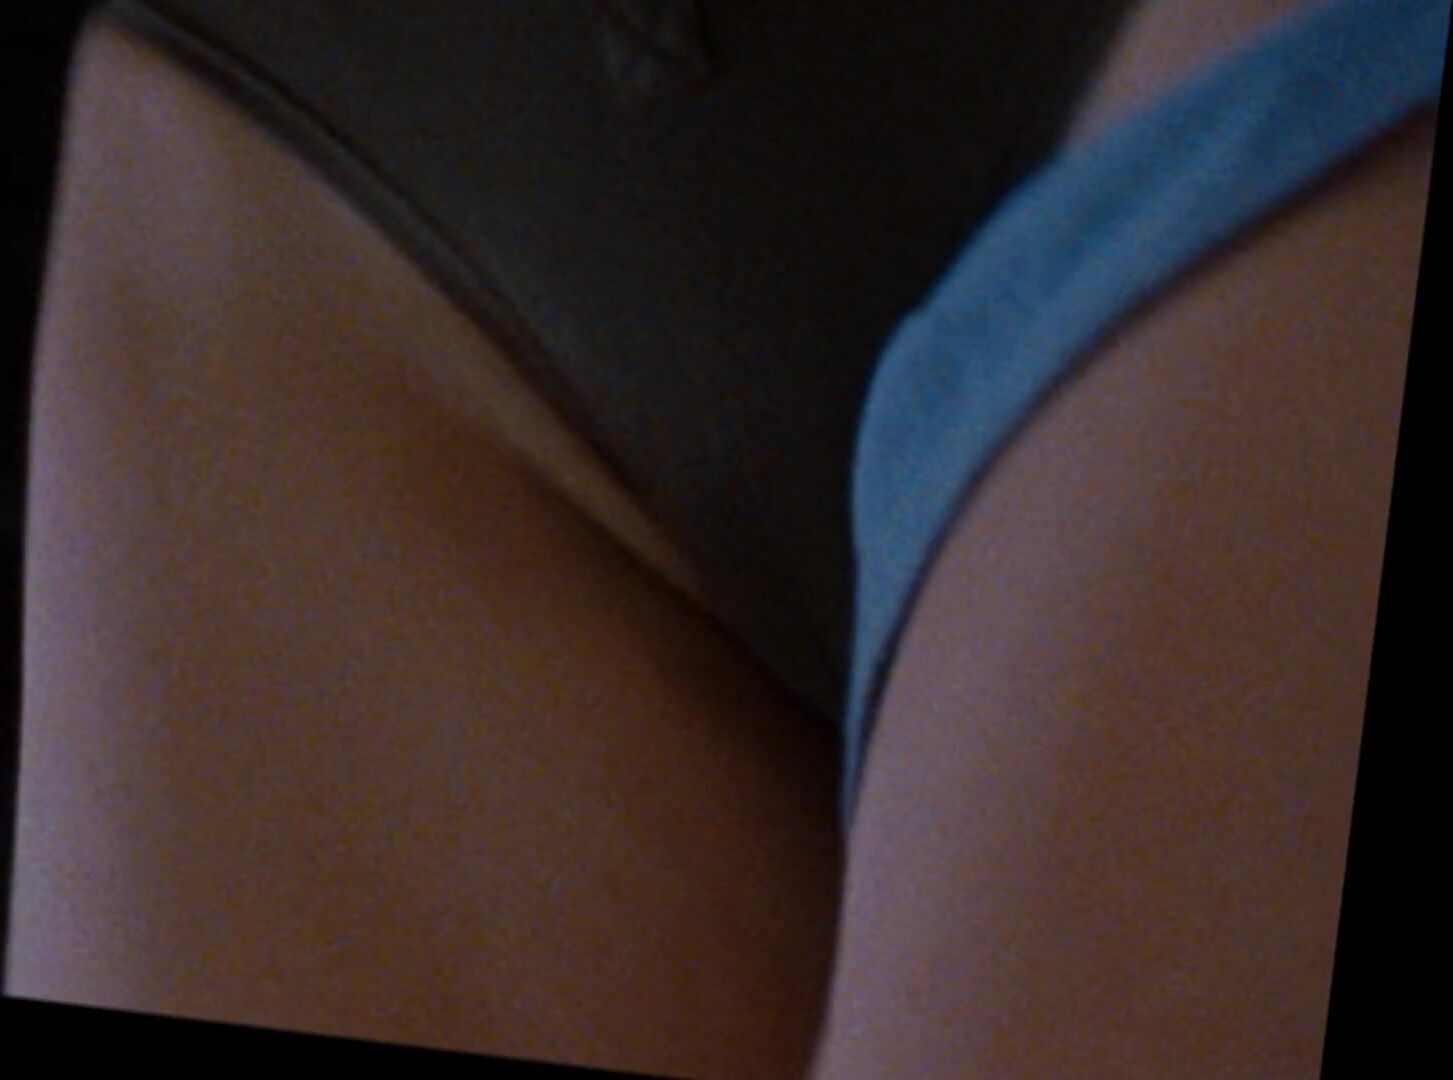 Tara Holiday Explicit sex and nude scenes of Natalie Portman flashing body parts in No Strings Attached Beeg